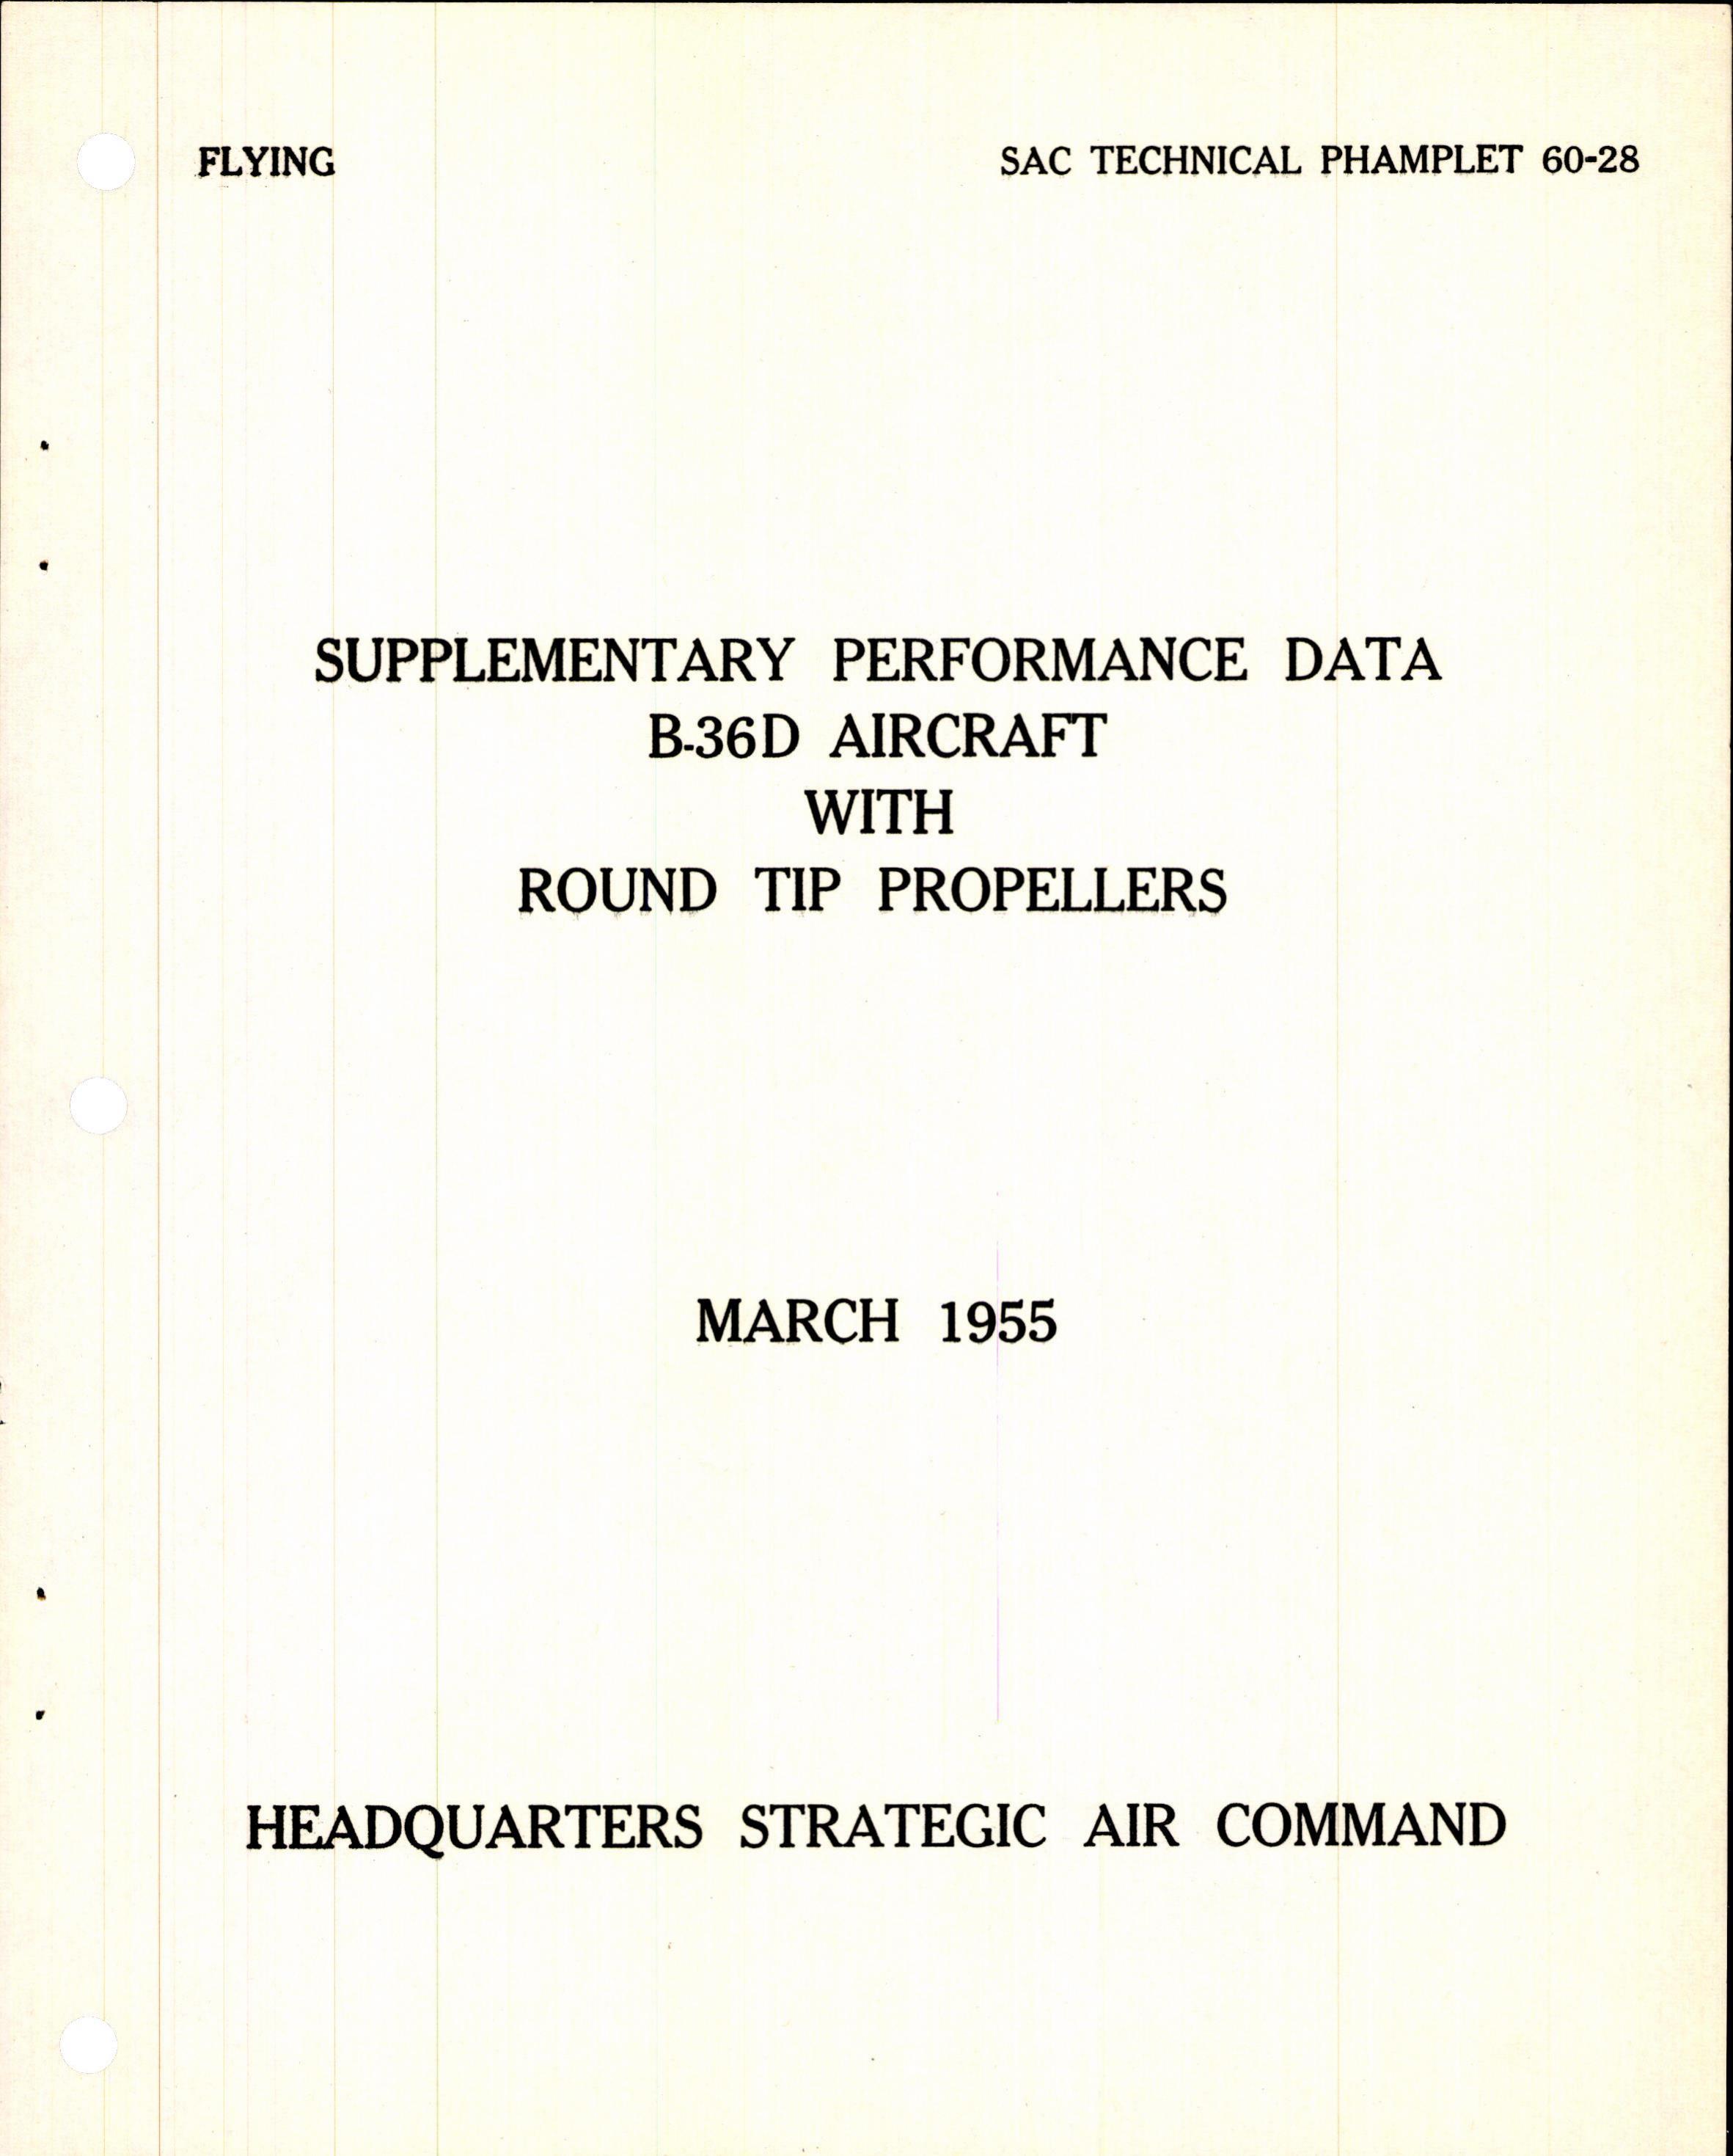 Sample page 3 from AirCorps Library document: Supplementary Performance Data for B-36D Aircraft with Round Tip Propellers